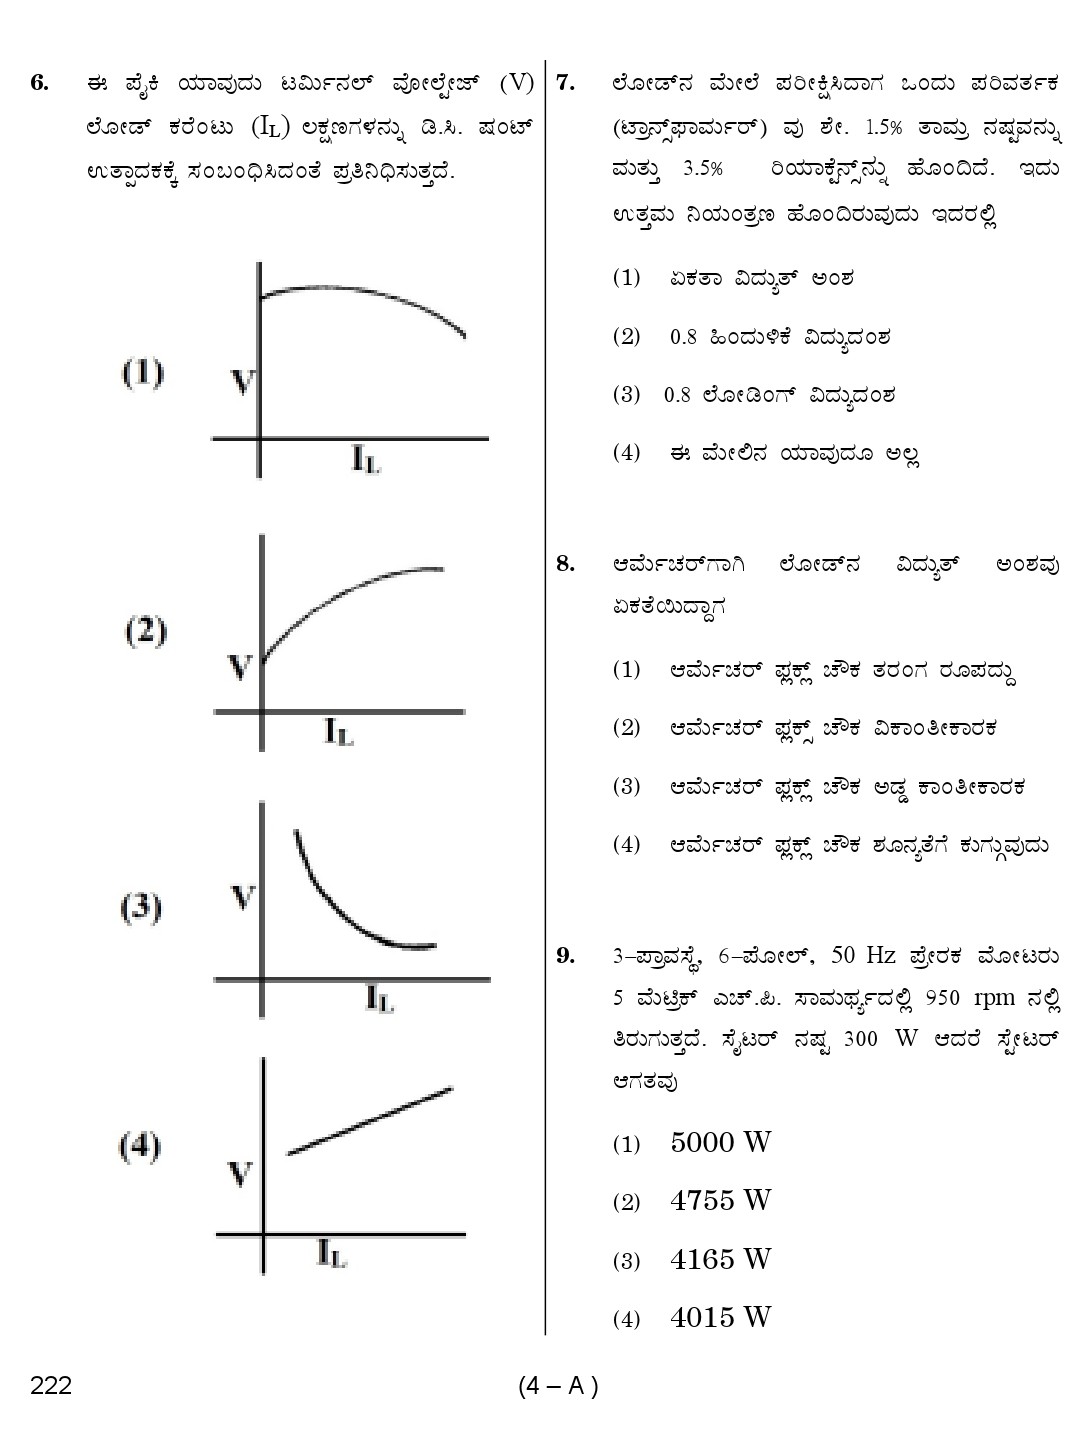 Karnataka PSC Assistant Engineer Electrical Exam Sample Question Paper 4